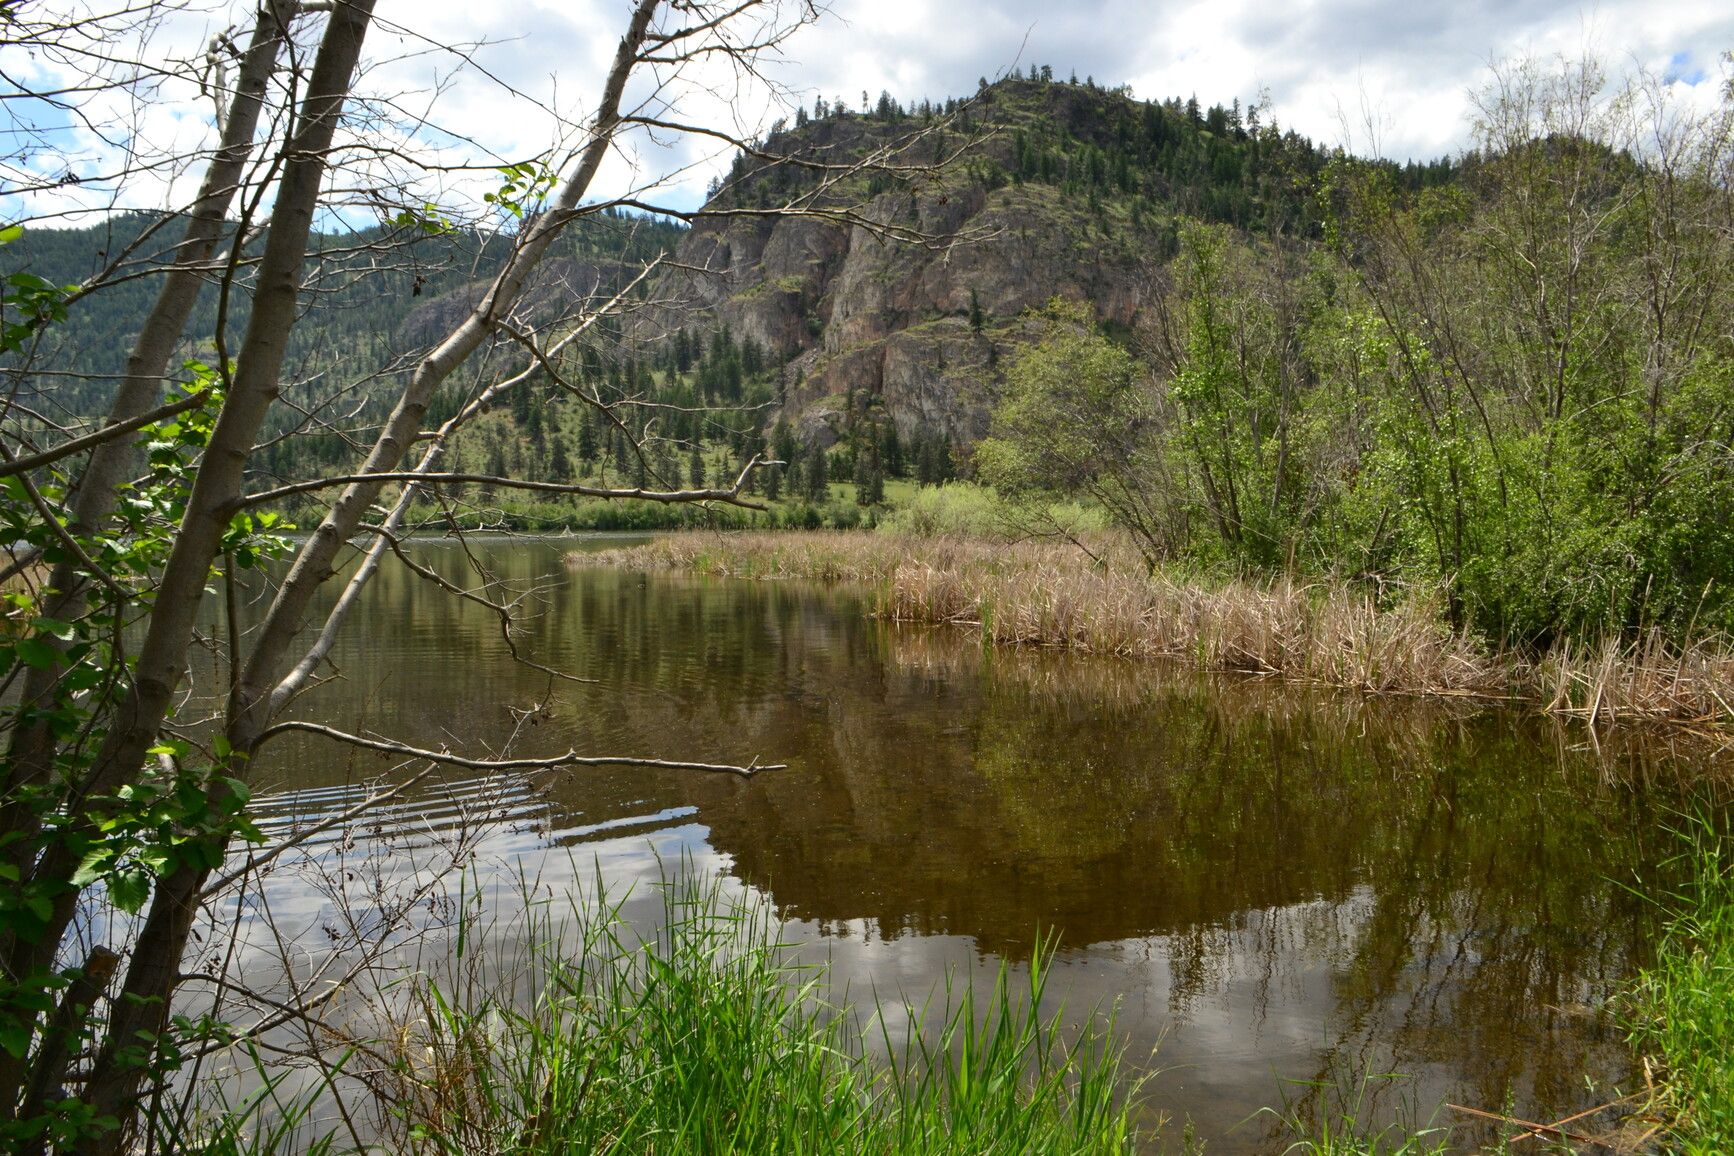 Vaseux Lake offers fishing opportunities for largemouth bass, rainbow trout, and carp.